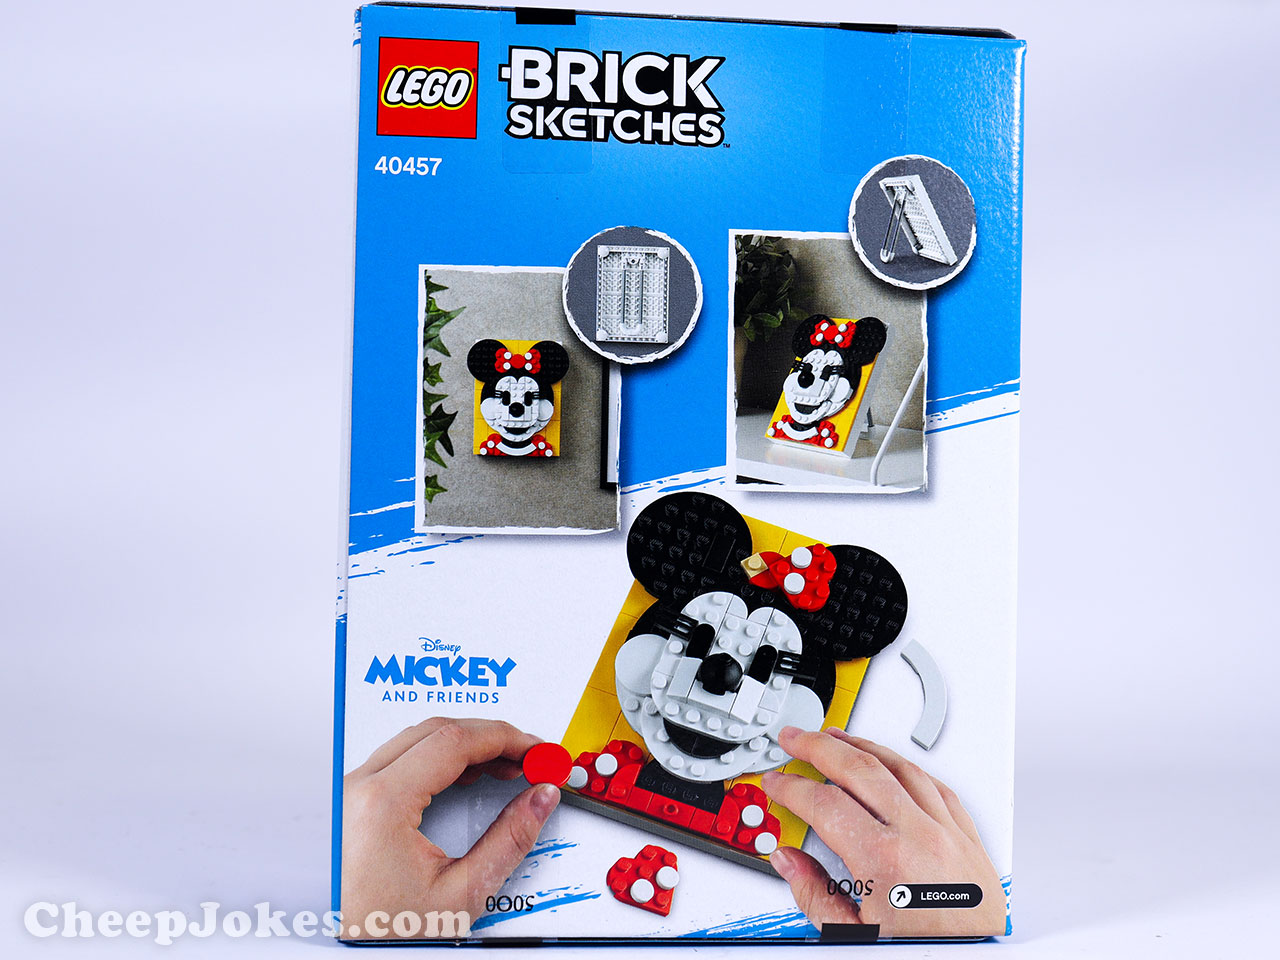 LEGO Brick Sketches -Disney - Mickey & Minnie  Fans of Disney’s iconic characters can build and display their own Mickey & Minnie Mouse illustration with this LEGO® Brick Sketches™ kit. Hang it on the wall using the built-in hook – the 12x16 baseplate holds the LEGO bricks firmly in place – or stand it on a shelf. It’s a perfect gift for birthdays, holidays or other celebrations and an impressive addition to any collection of LEGO Brick Sketches character portraits.